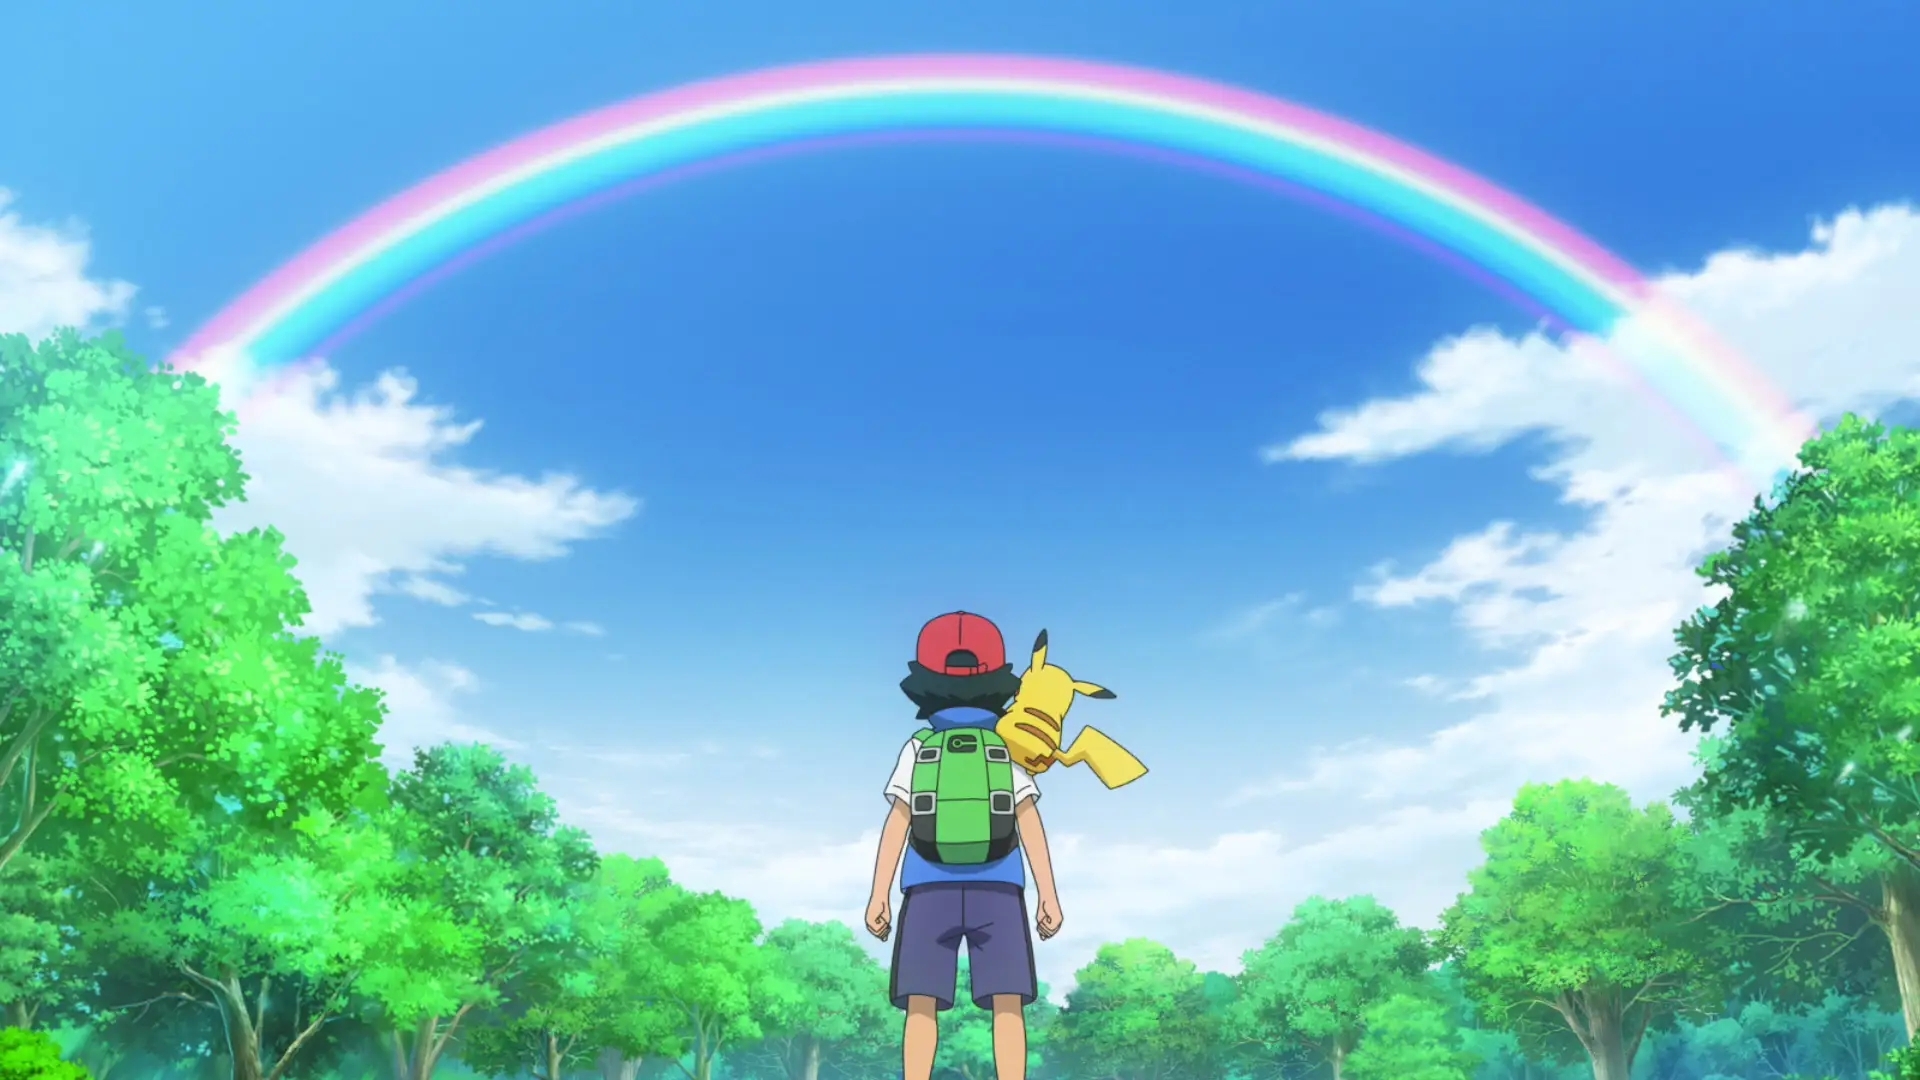 Ash and Pikachu looking up at a rainbow